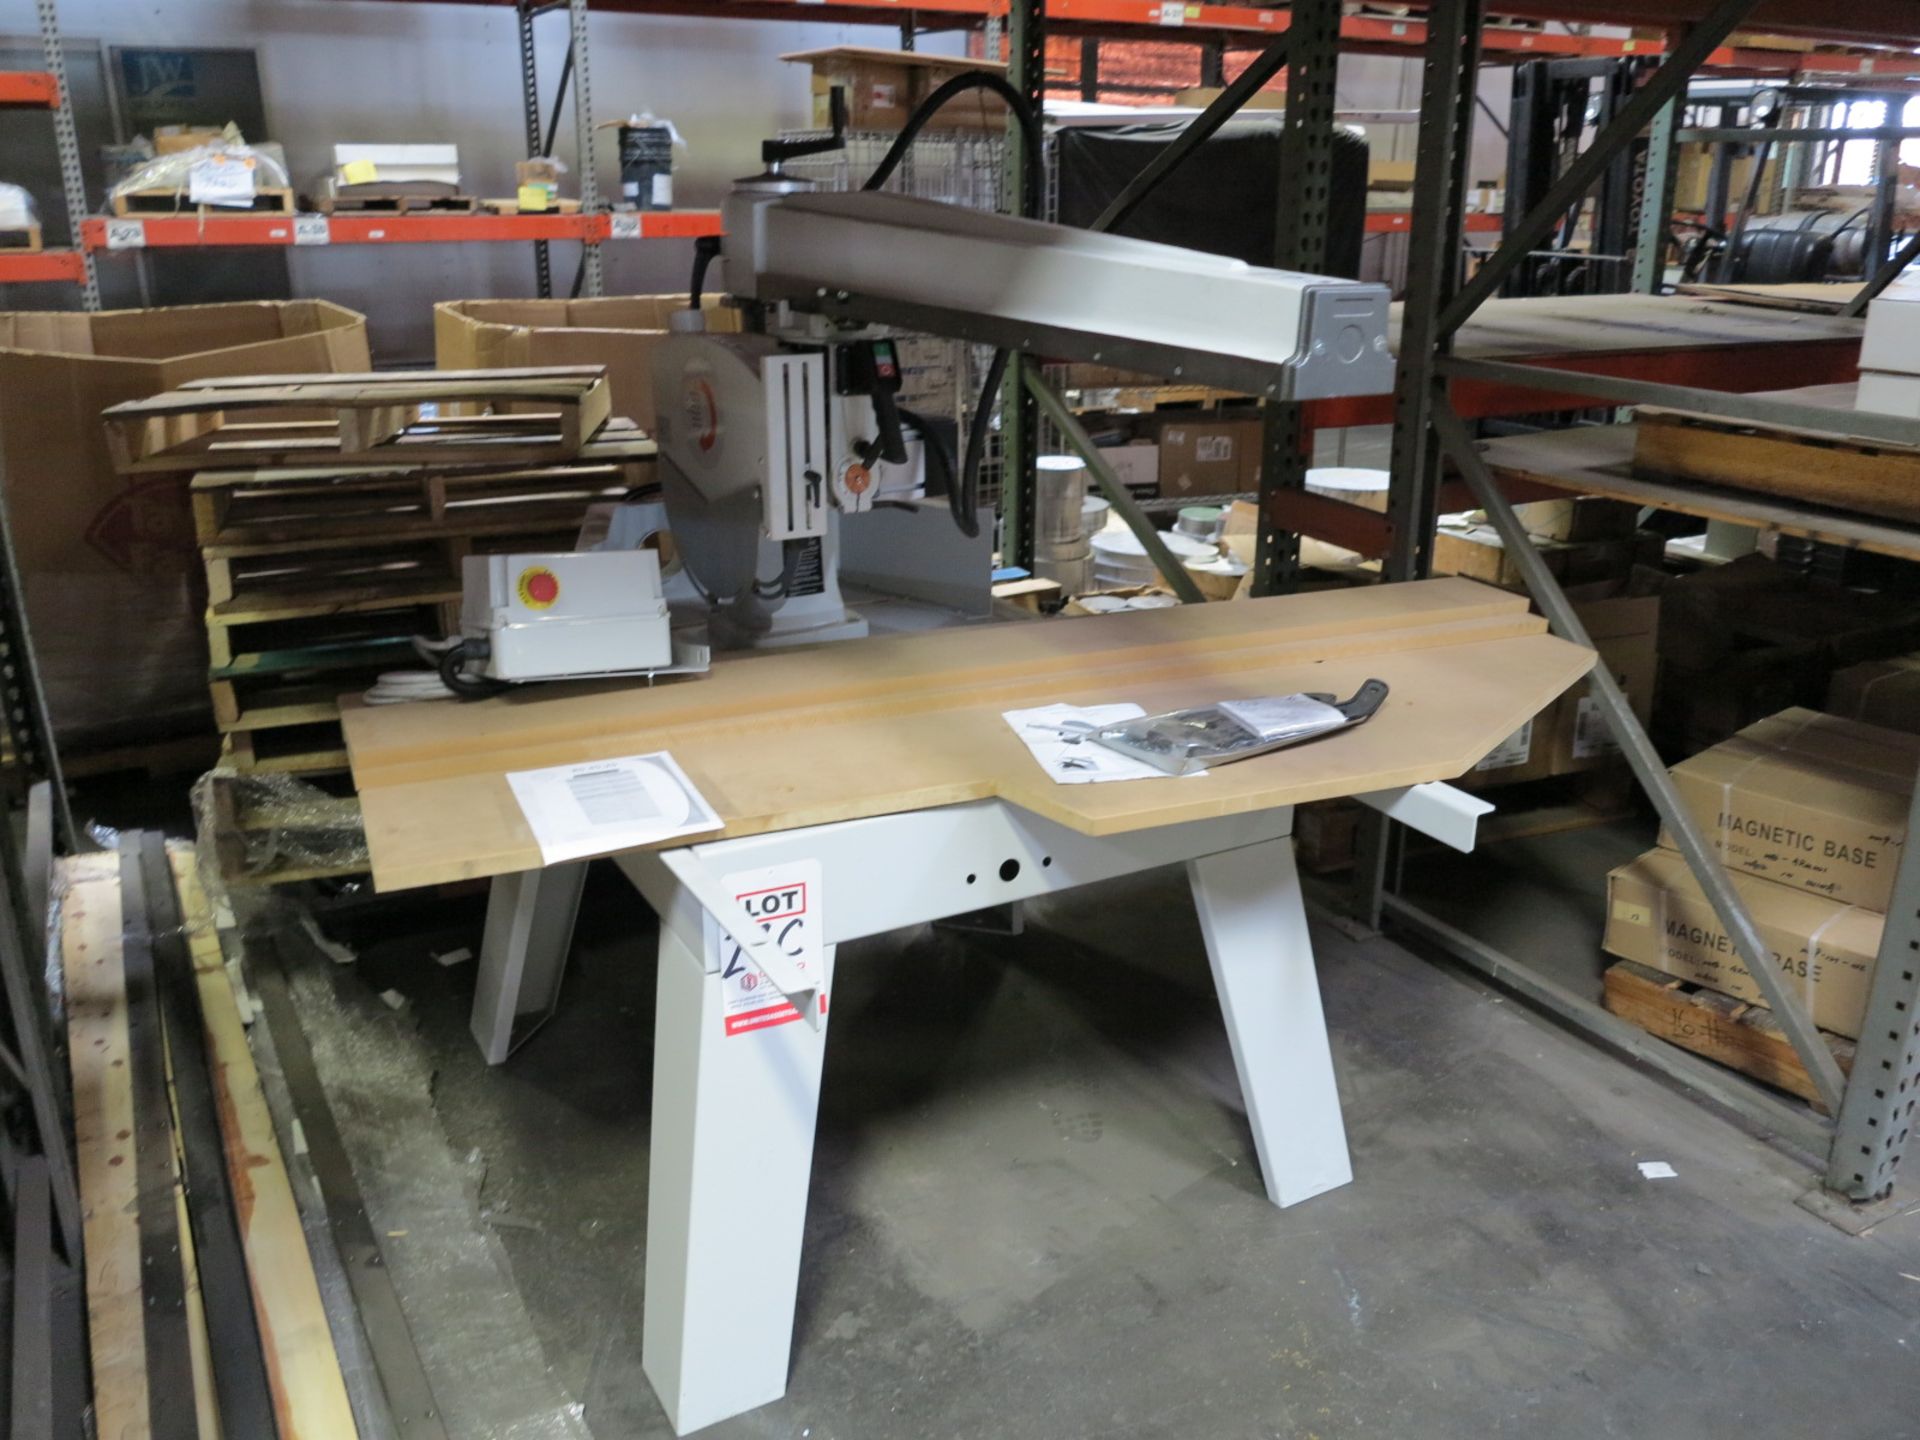 CONQUEST IND. 15-3/4" RADIAL ARM SAW, 4 HP, 230V, 3-PHASE, 60 HZ, MAX CUT DEPTH: 4-29/32", NEW/